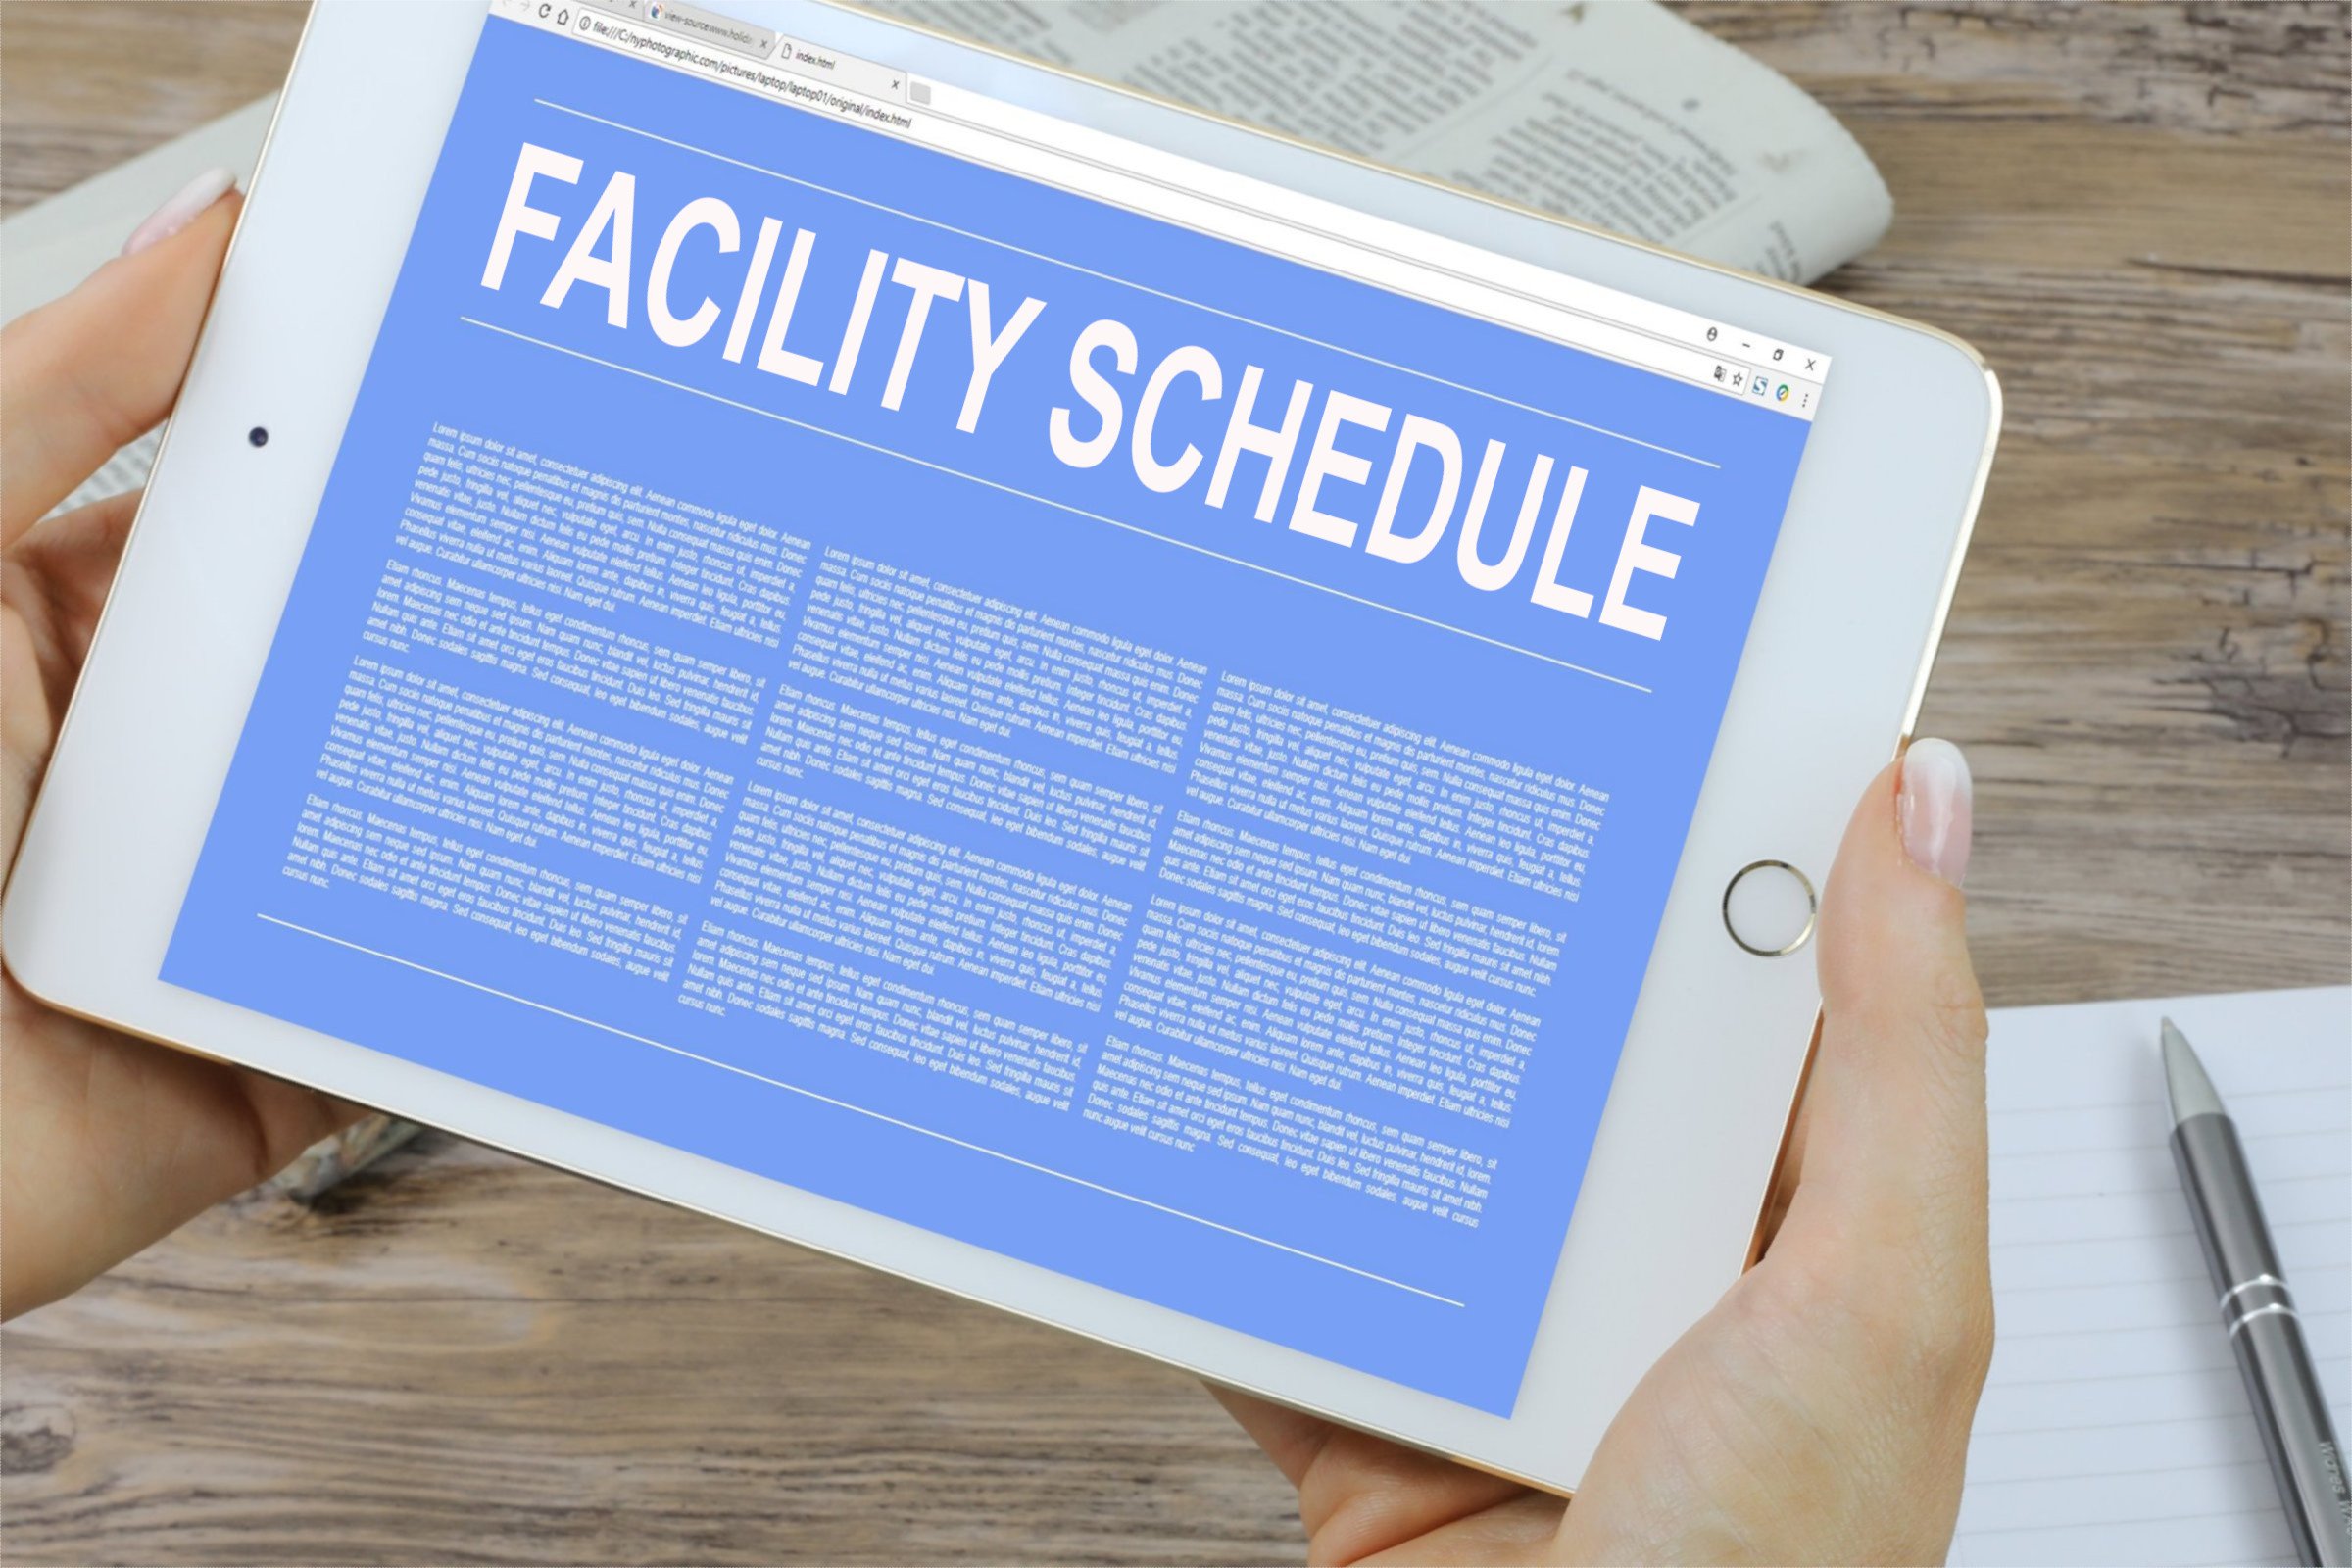 facility schedule